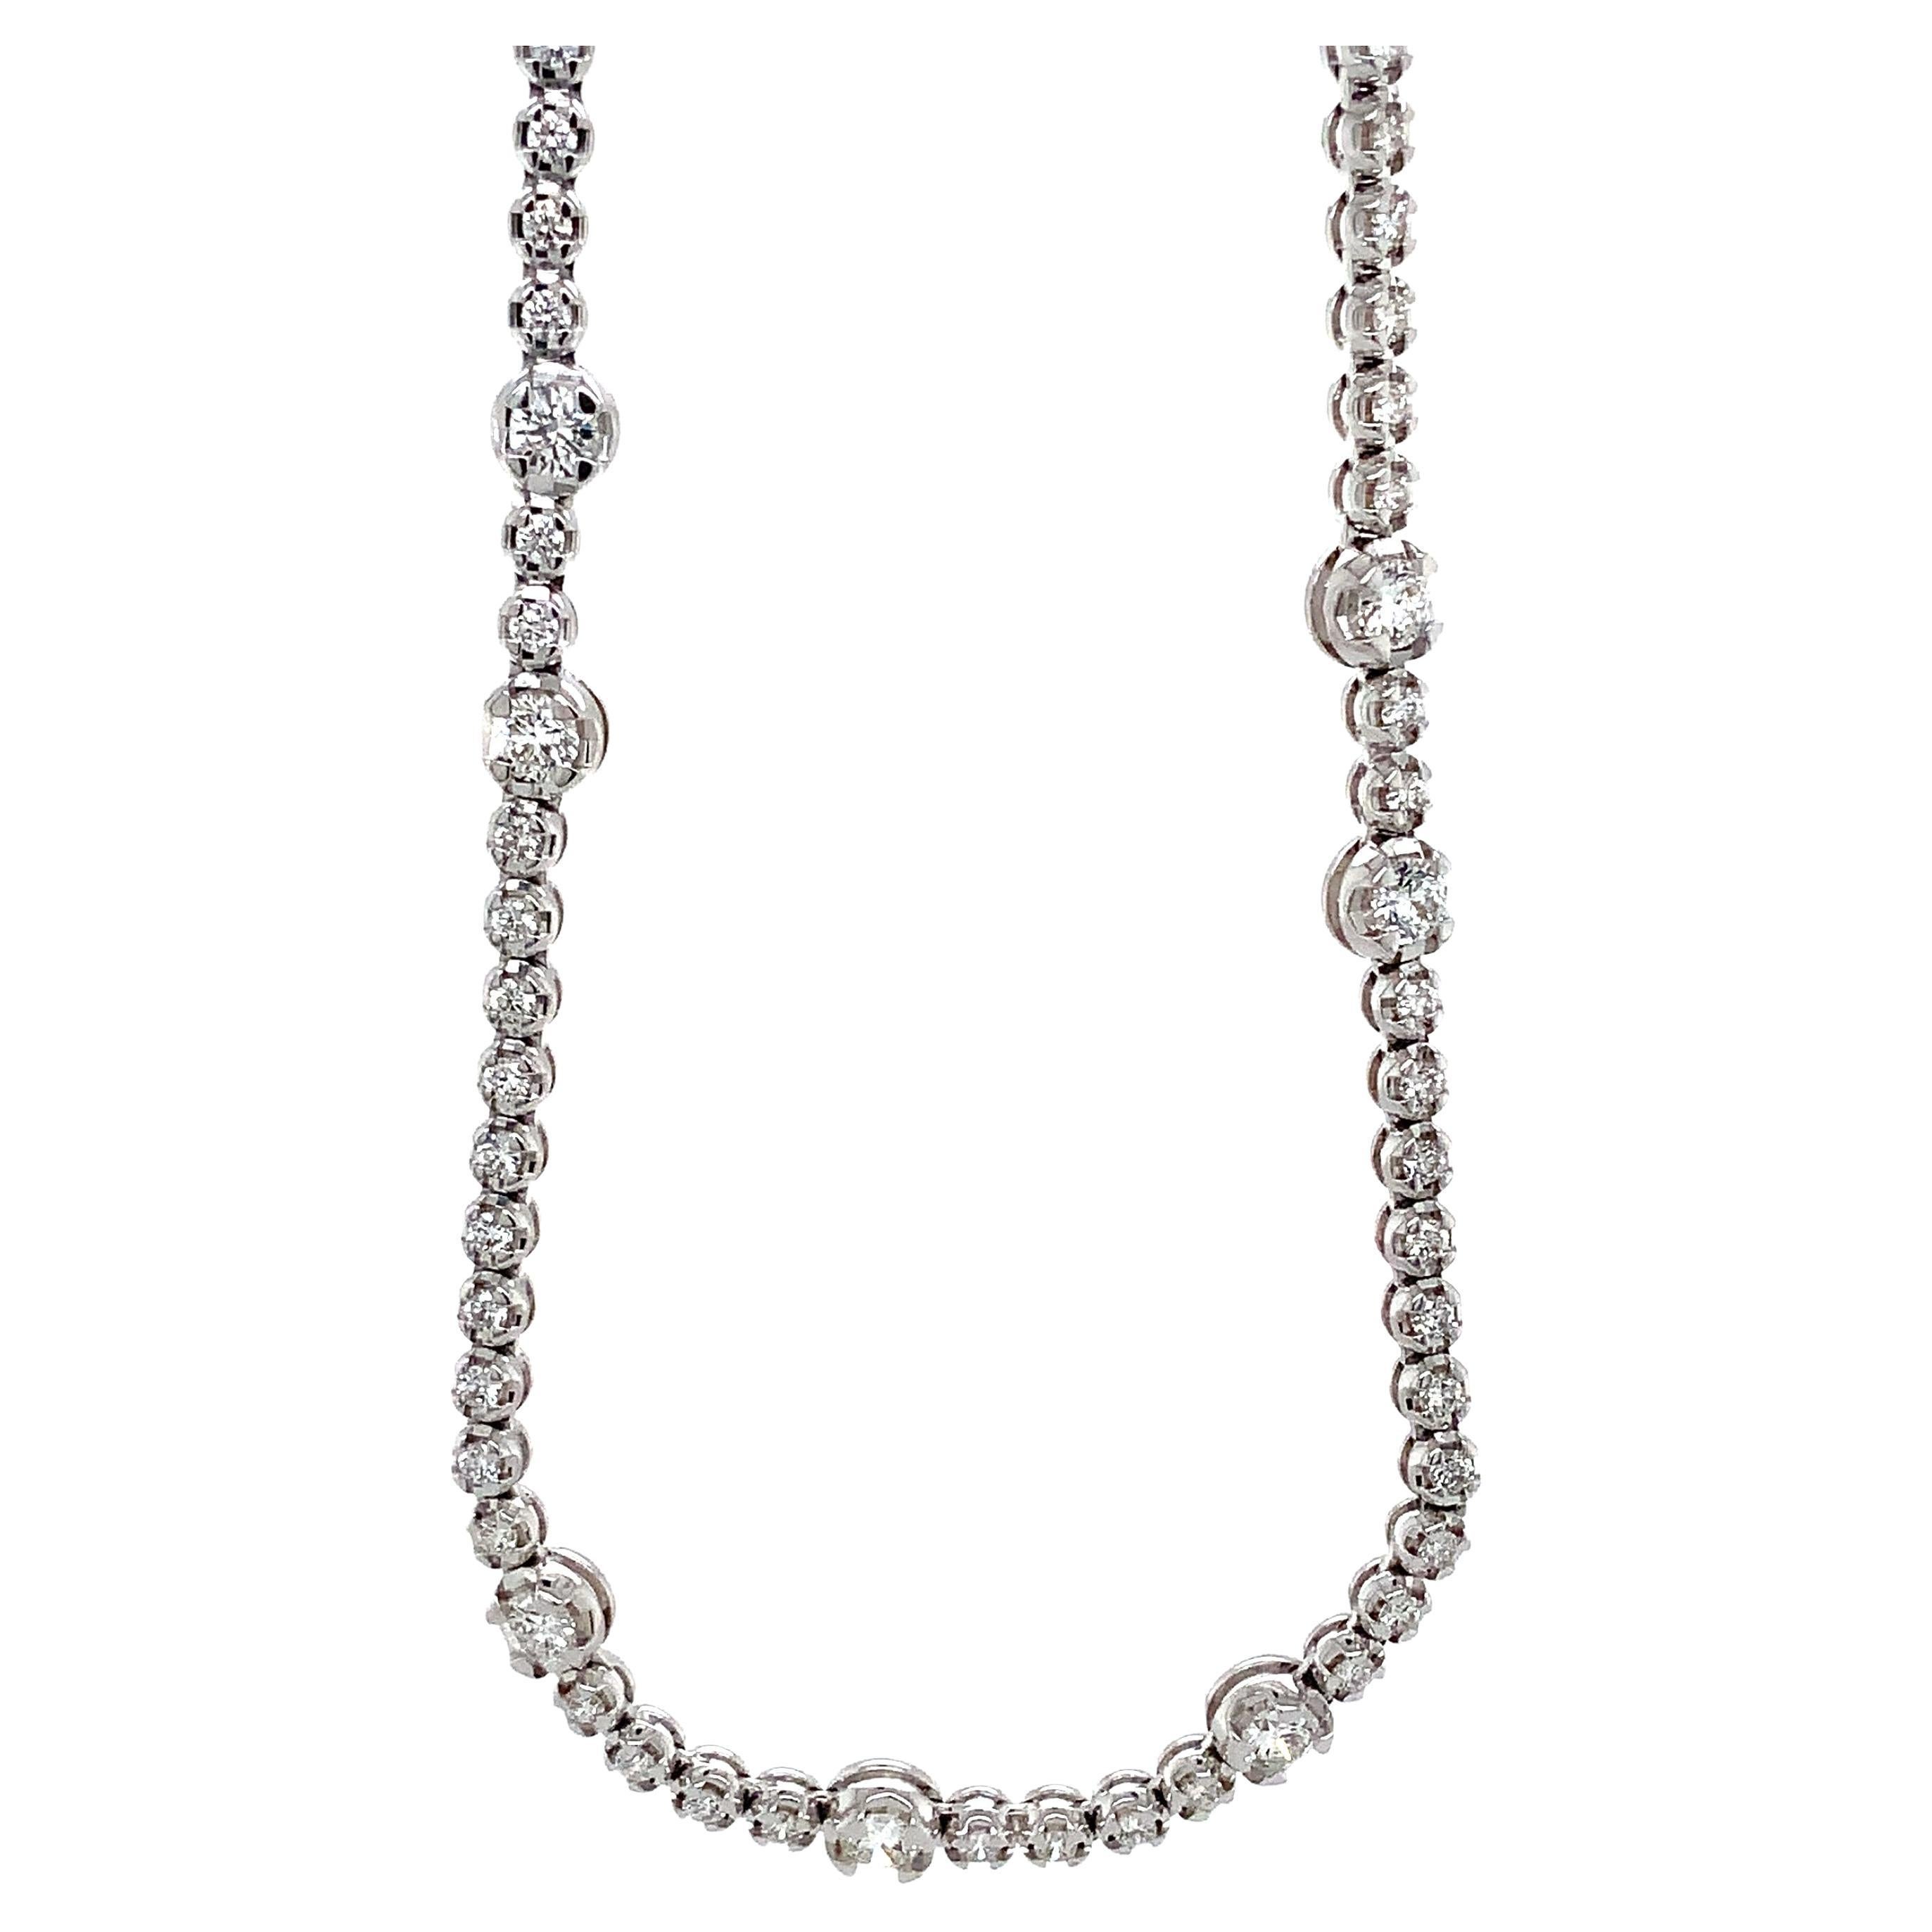 Link Collection Opera Length Diamond Chain Necklace 3.66cts. Tw Set in 18k